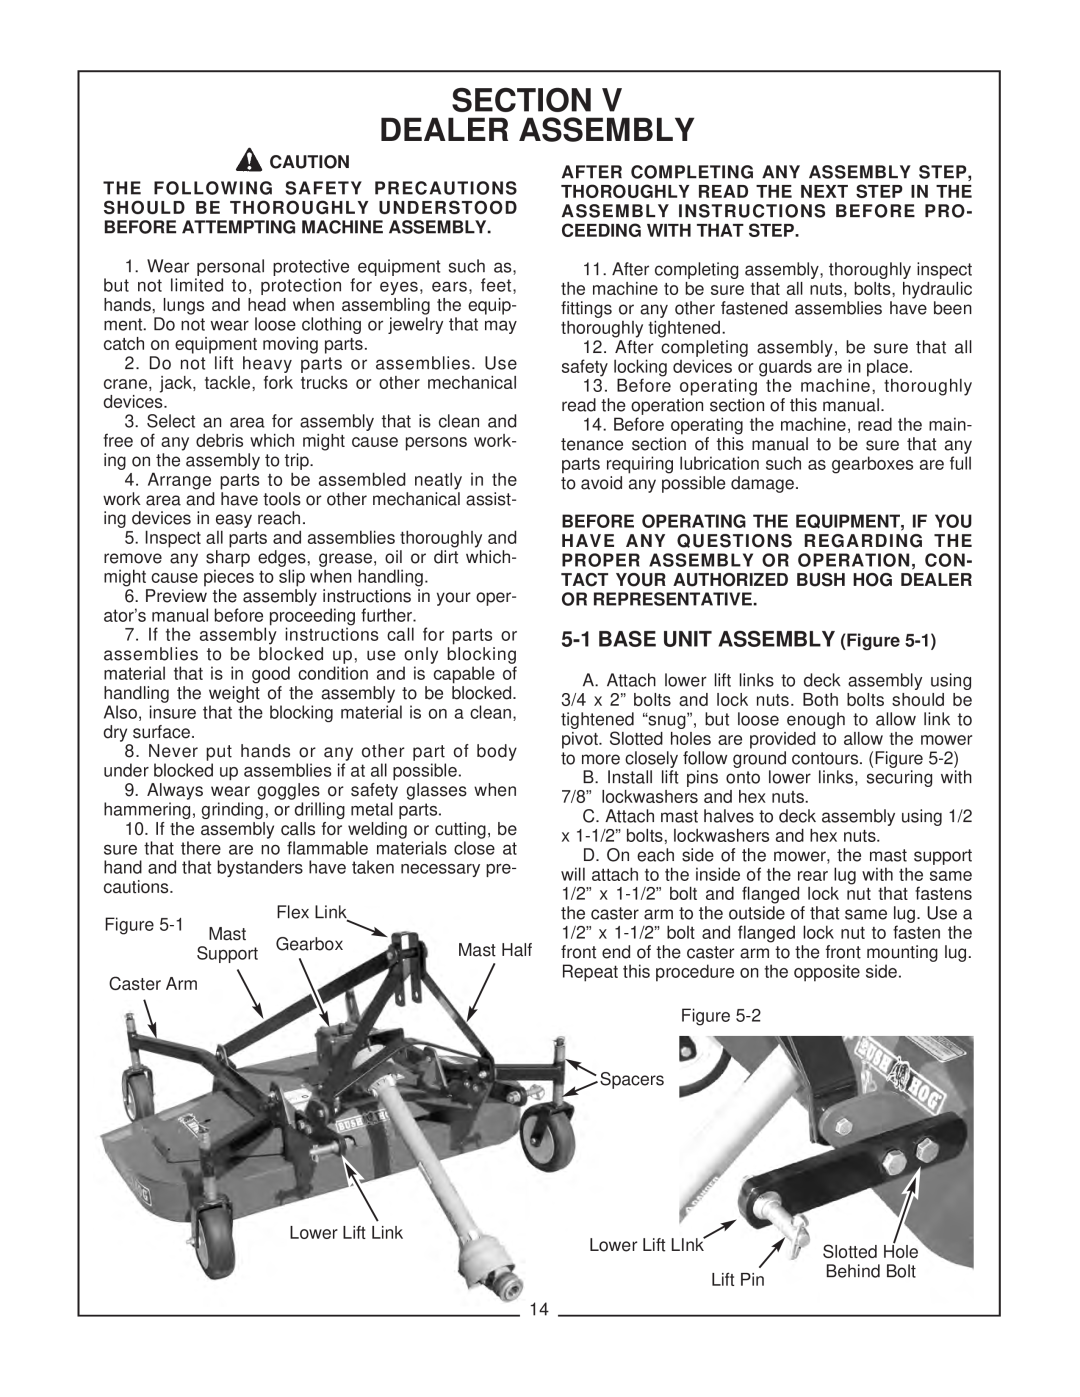 Bush Hog RFM 60 manual Section, Dealer Assembly, After Completing Any Assembly Step, The Following Safety Precautions 